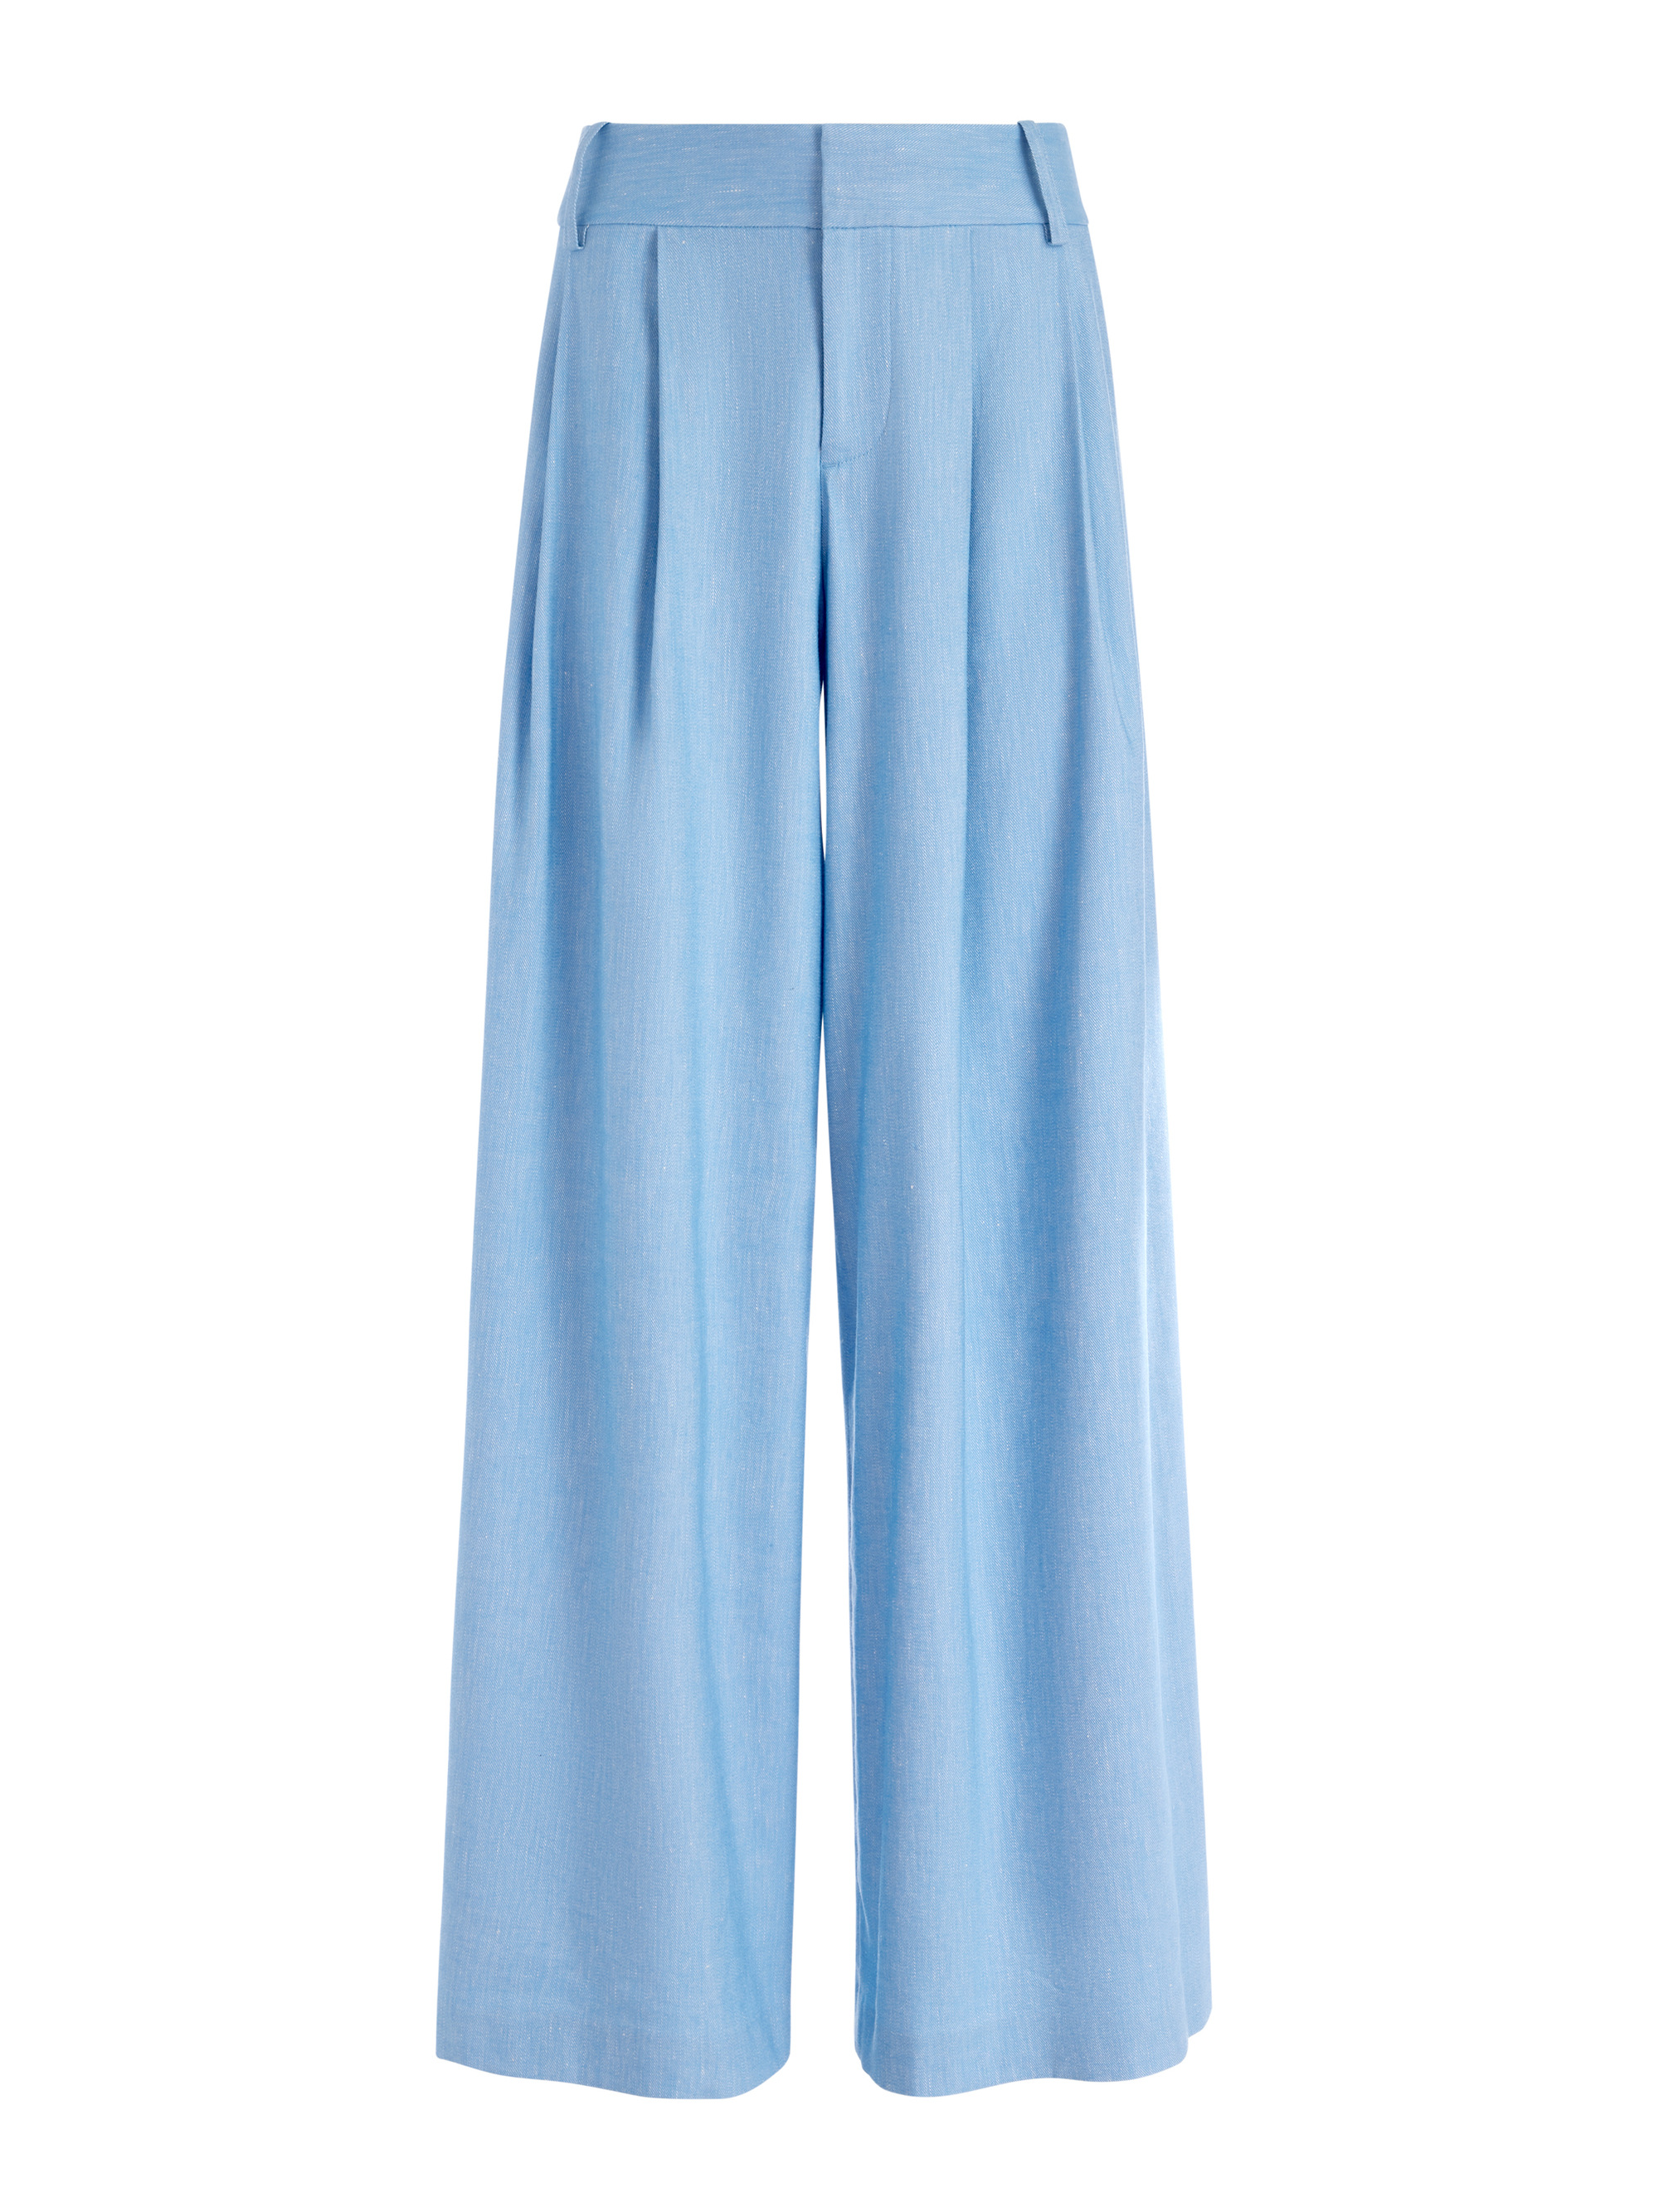 SCARLET WIDE LEG FLARE PANT - CHAMBRAY - Alice And Olivia